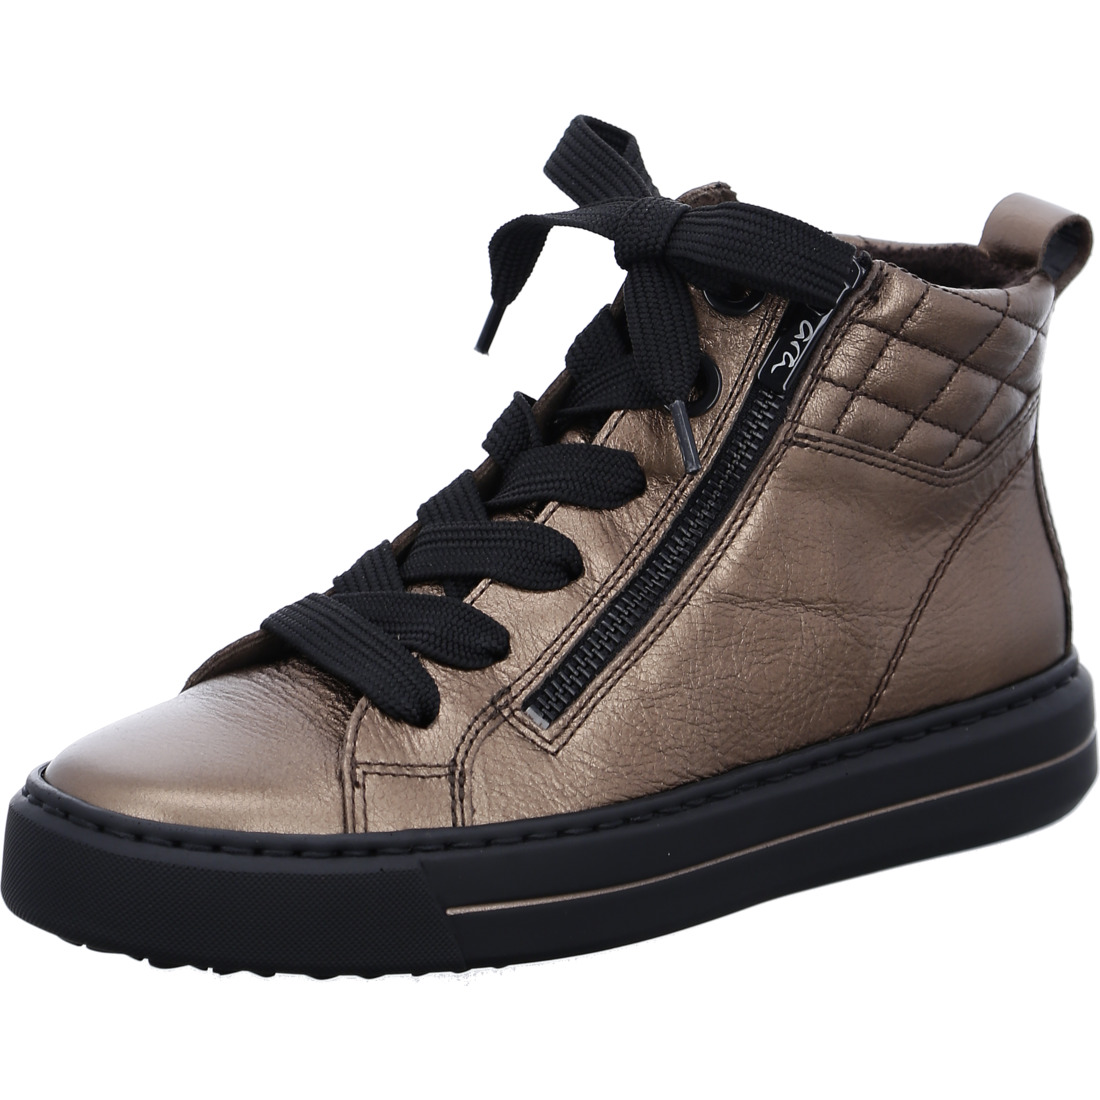 Stiefelette Courtyard - Moro smooth leather